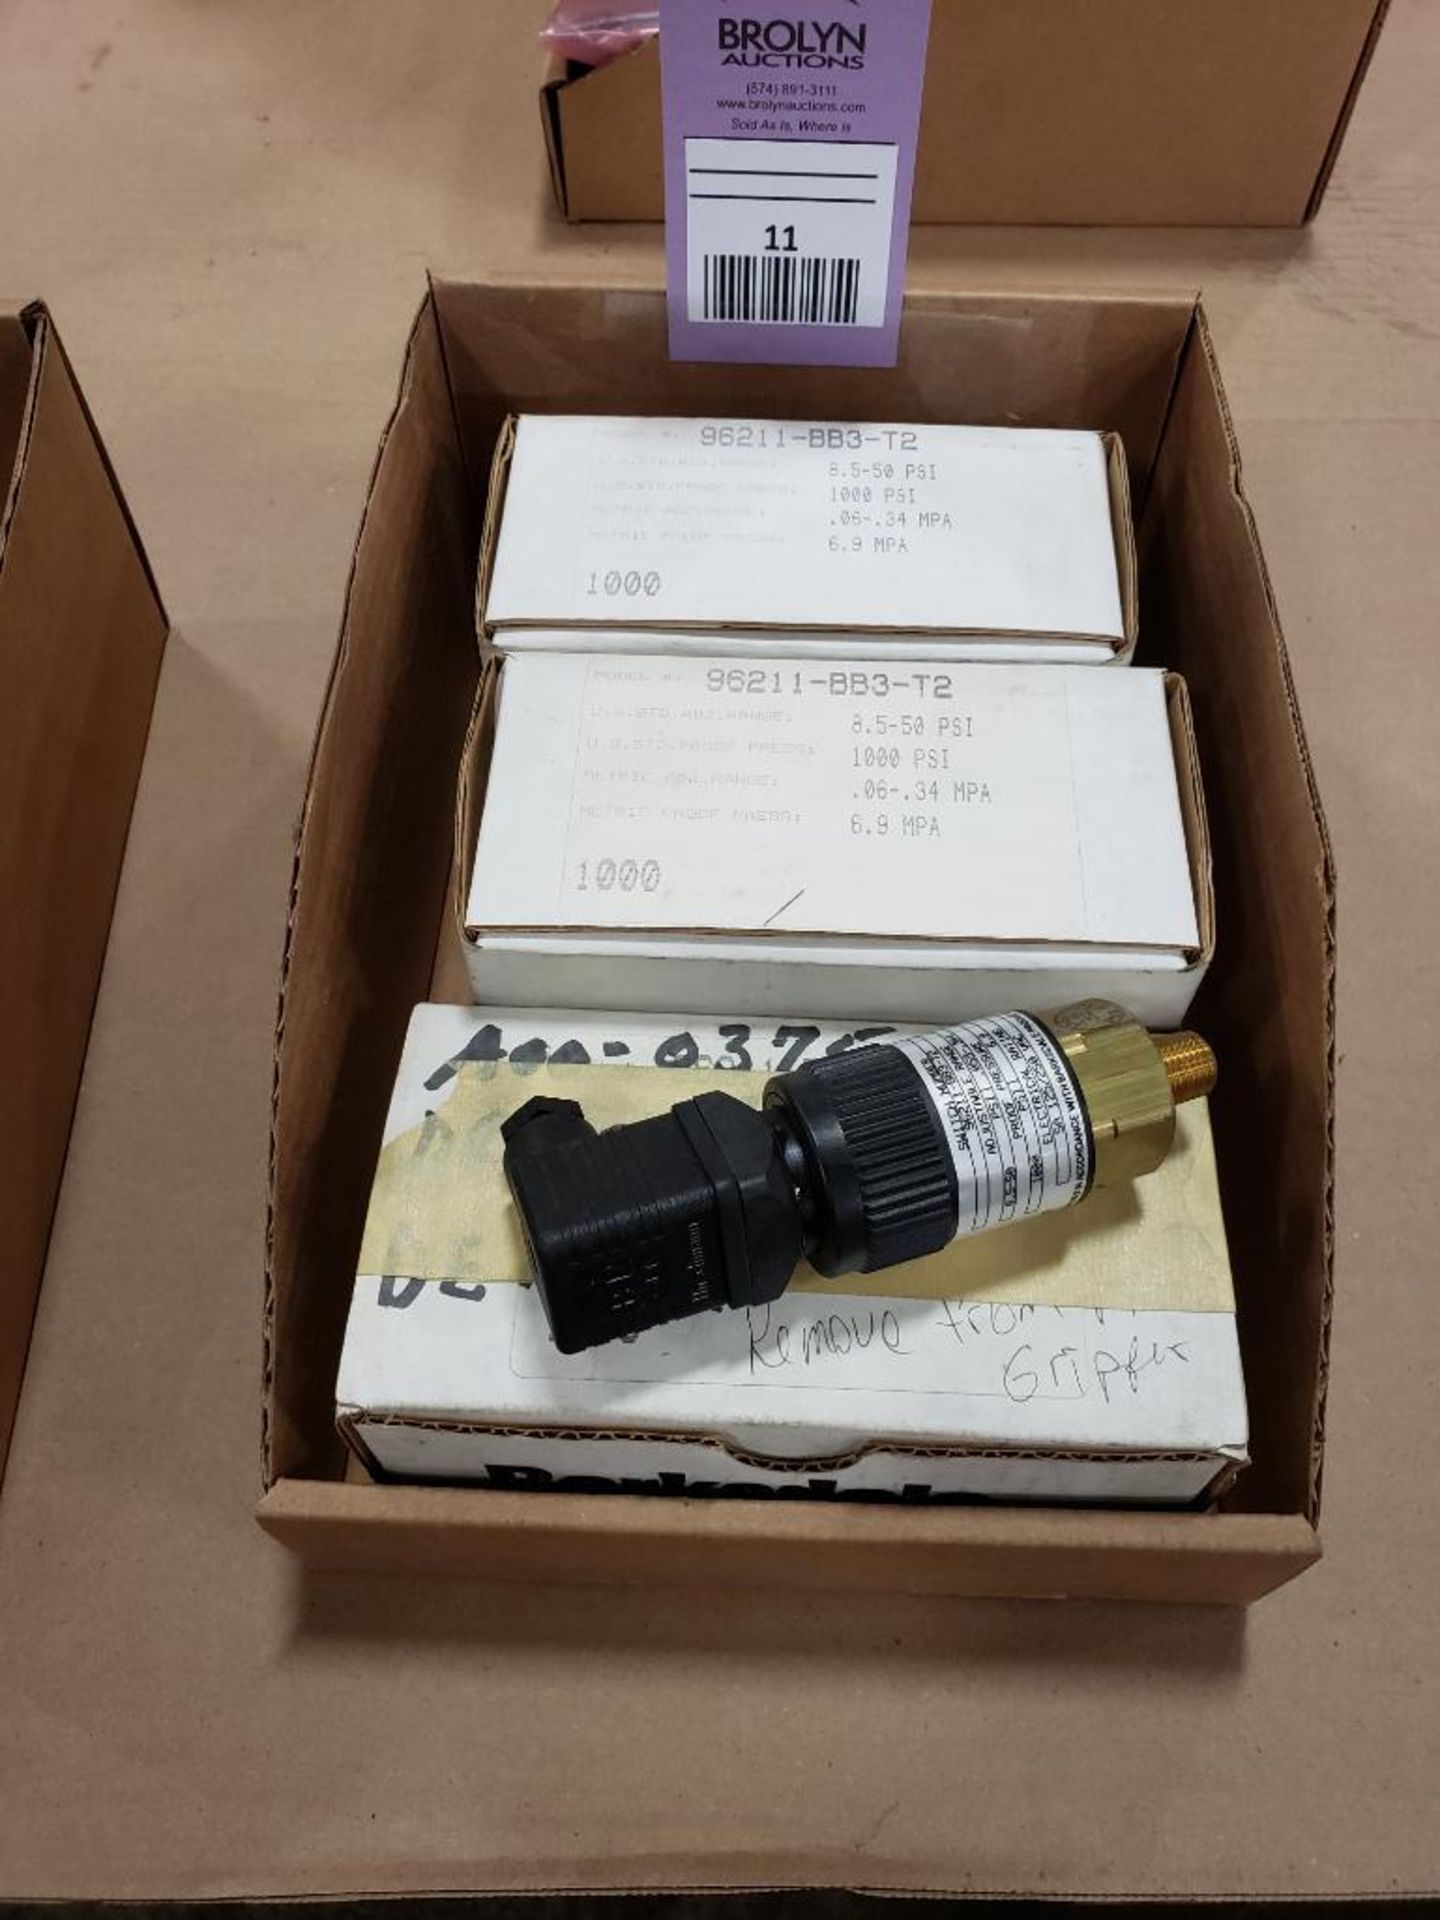 Qty 3 - Barksdale pressure switch. Model 96211-BB3-T2. New in boxes.